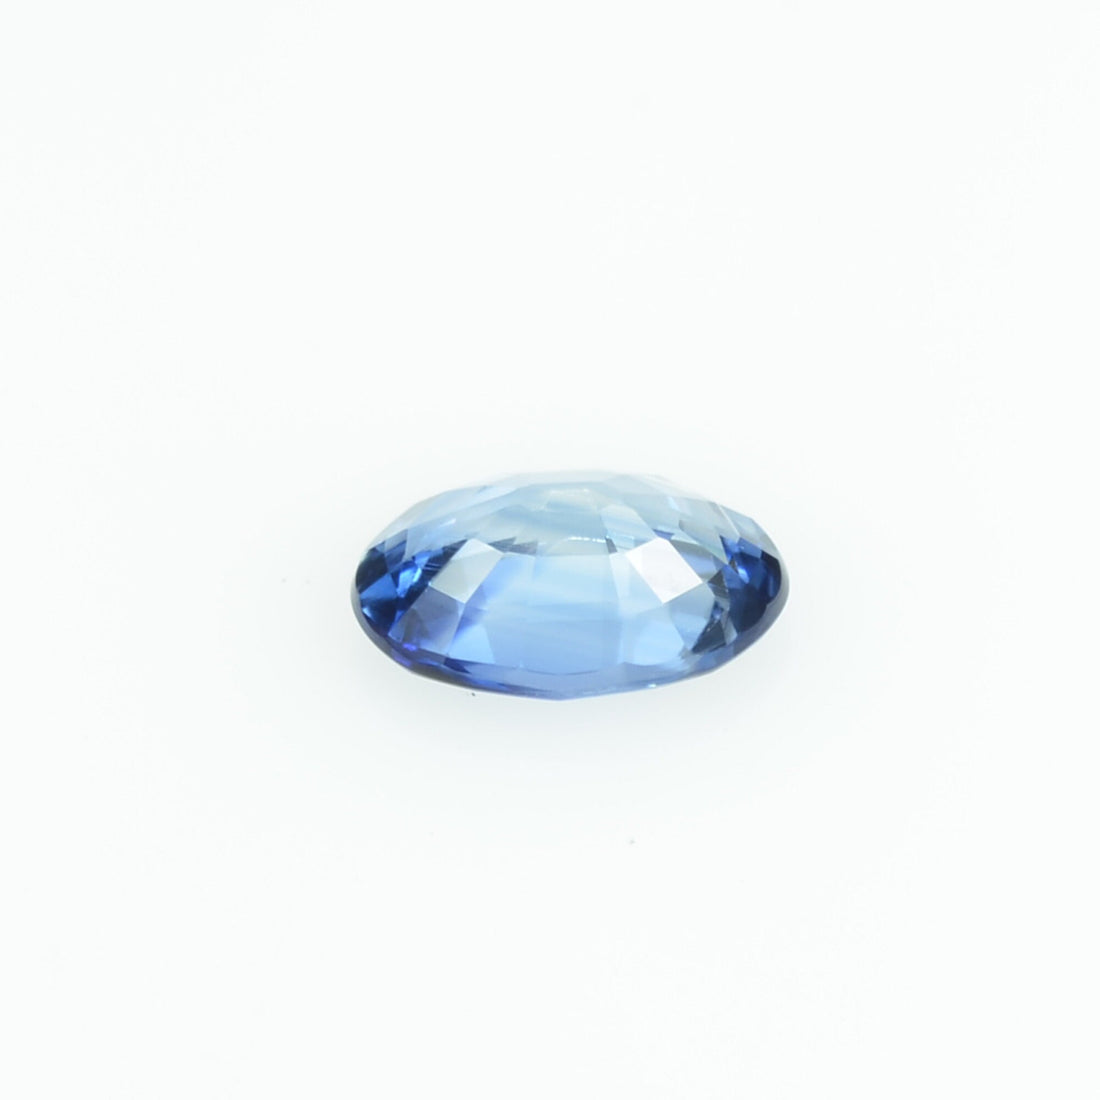 0.51 cts natural blue sapphire loose gemstone oval cut